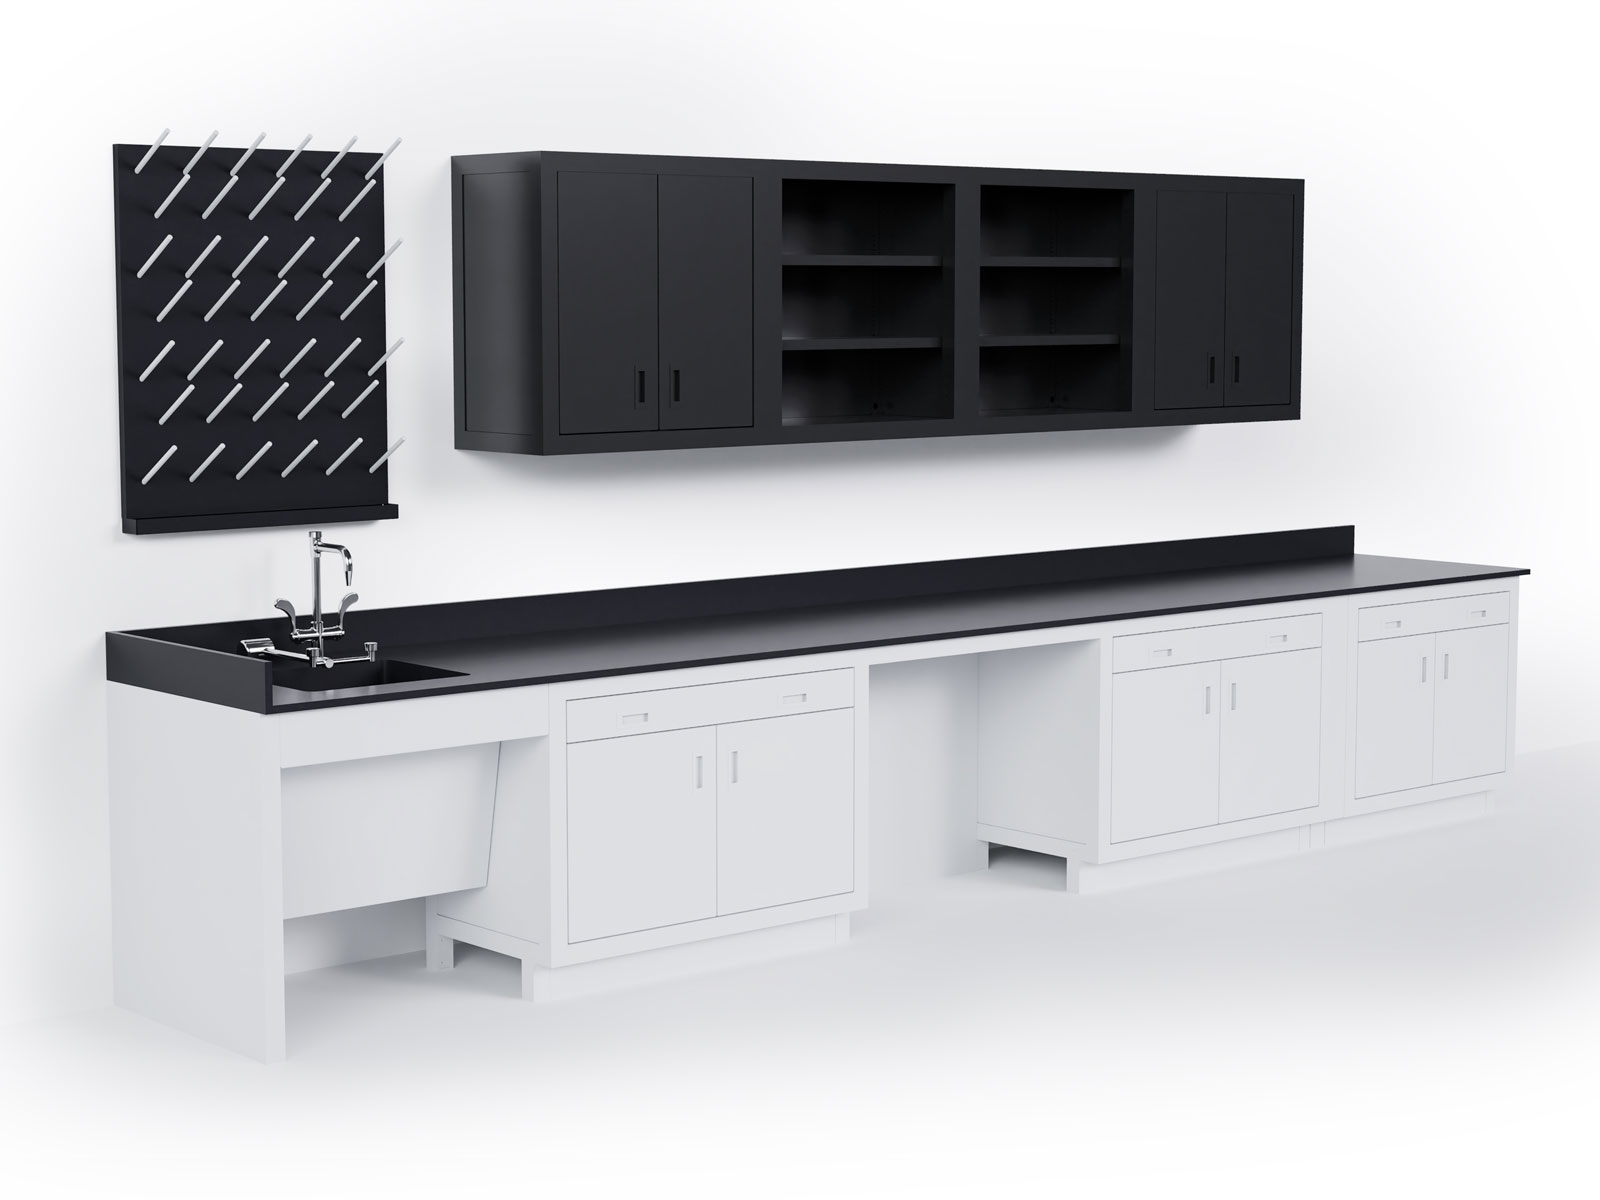 rgx modular casework with black phenolic worksurface, pegboard, fixed casework, and epoxy sink